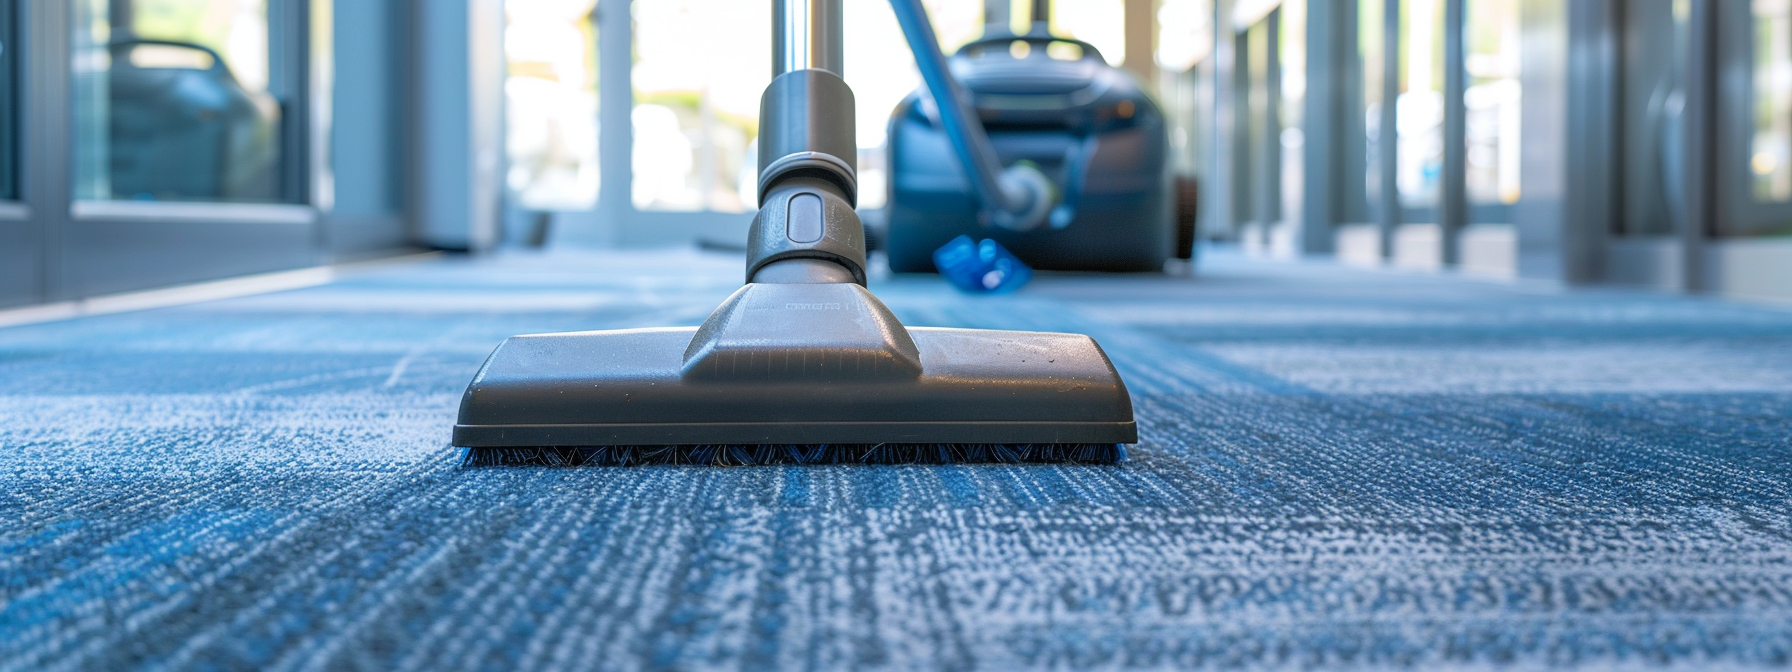 Carpet cleaning contracts for businesses